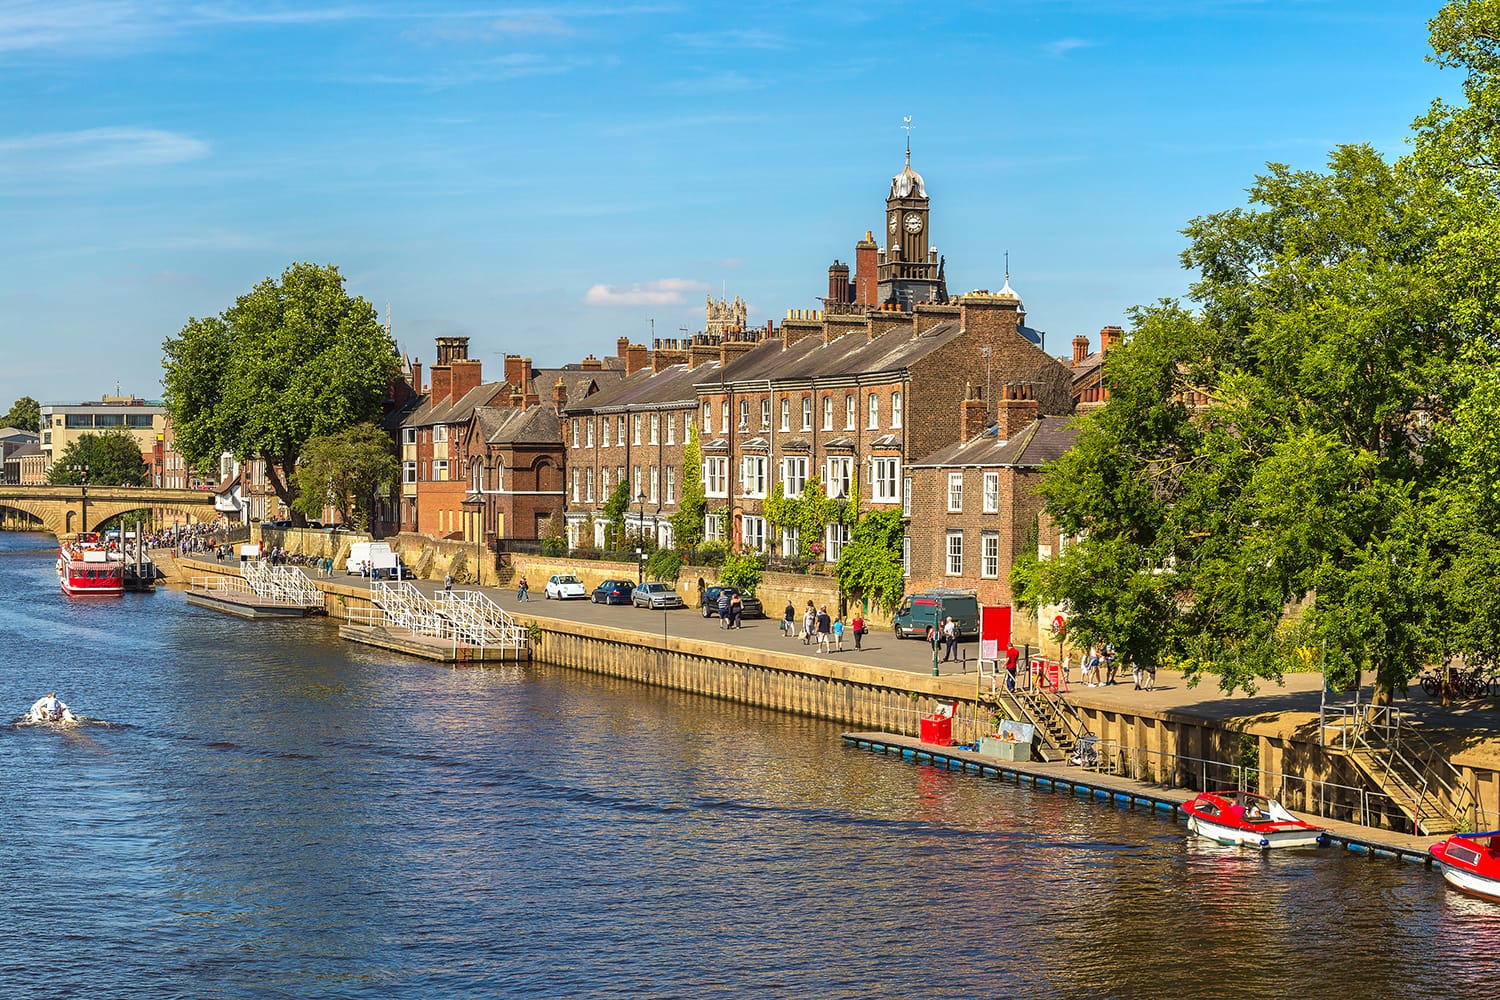 River Ouse in York, North Yorkshire, England, UK